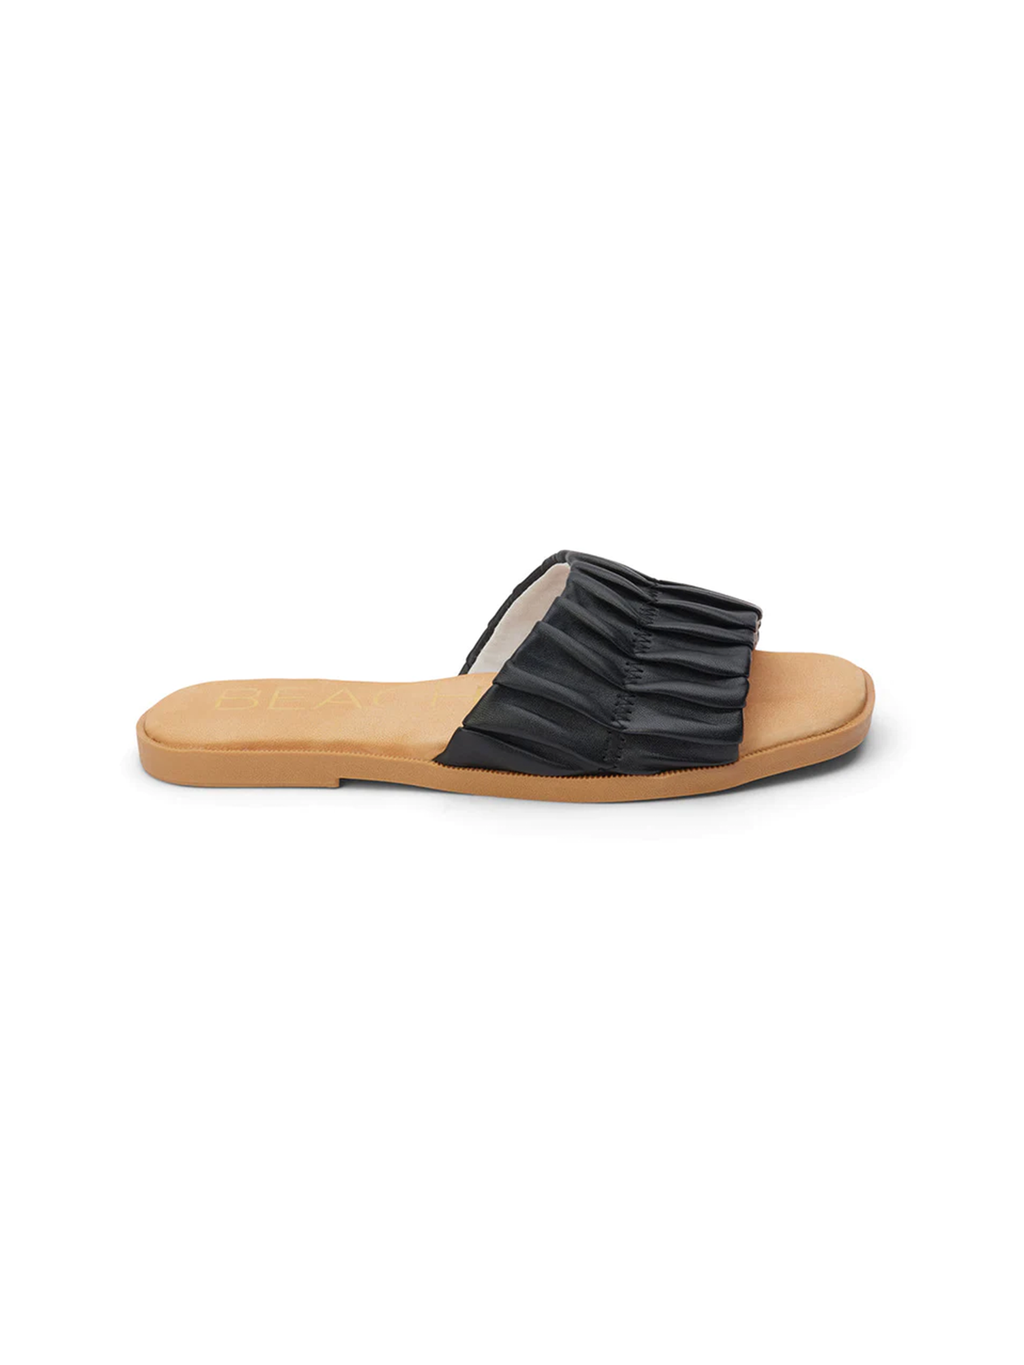 Viva Slide in Black - Stitch And Feather